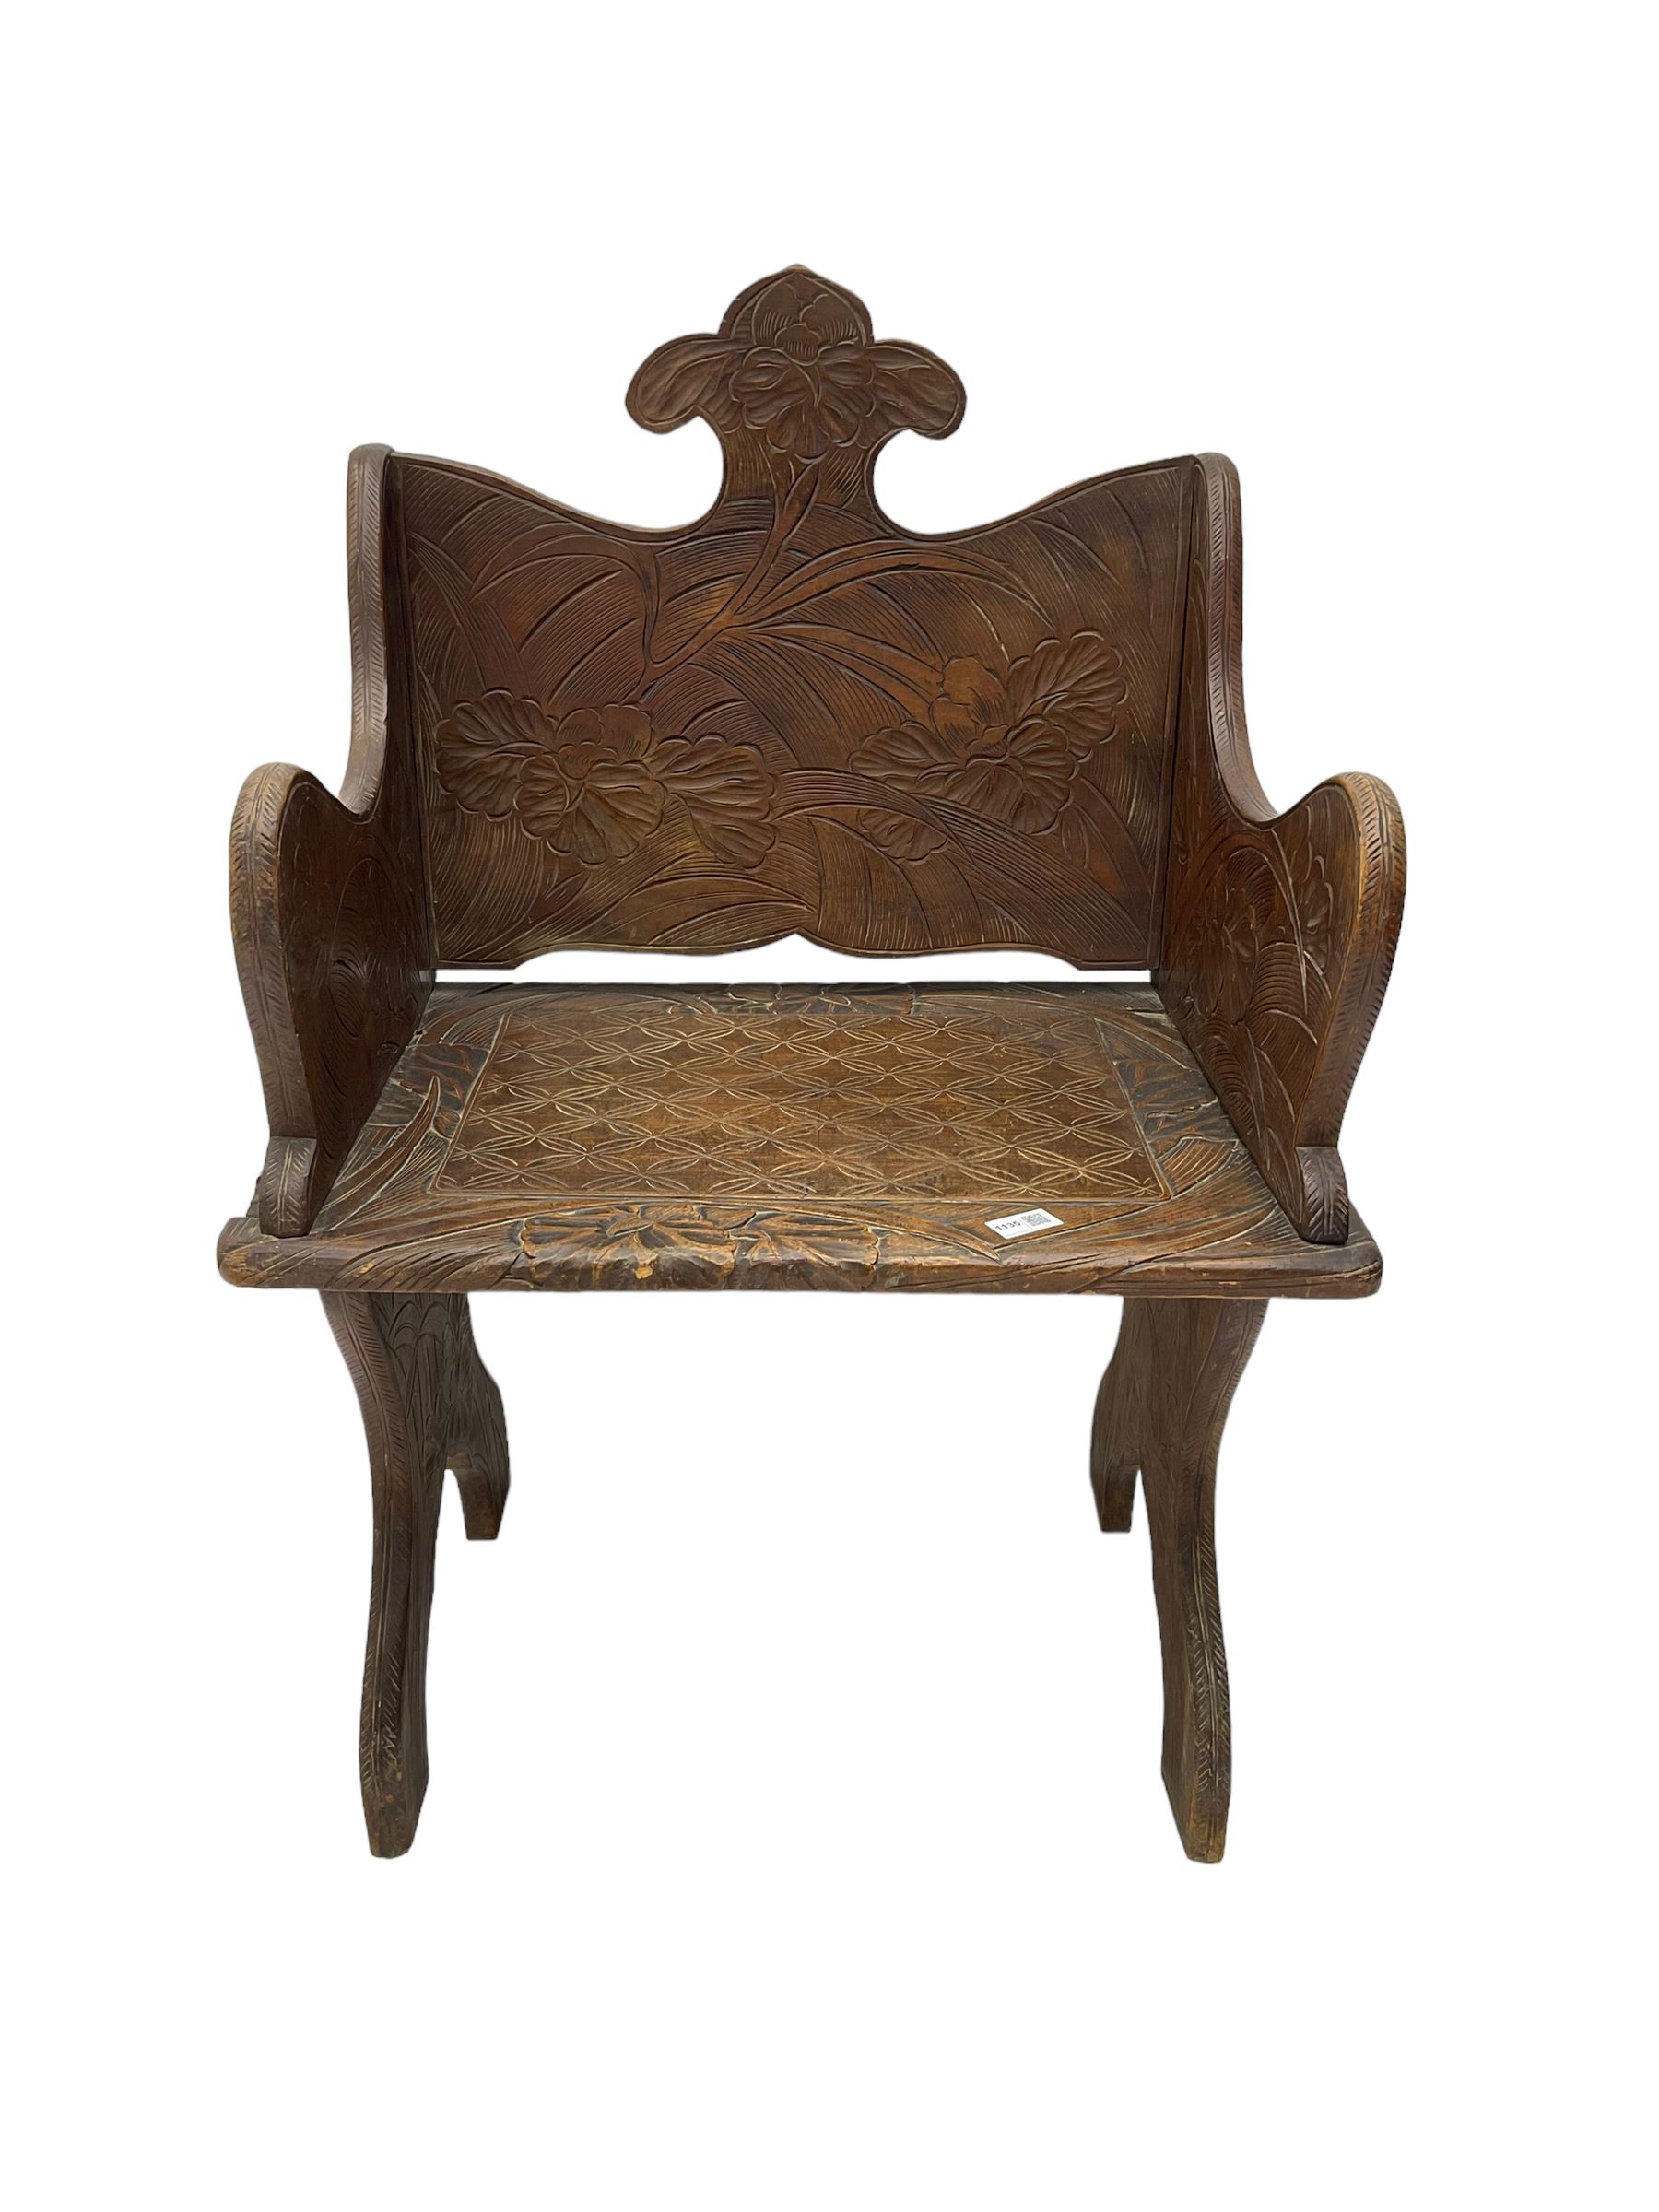 Late 20th century stained beech boarded plank chair - Image 7 of 7